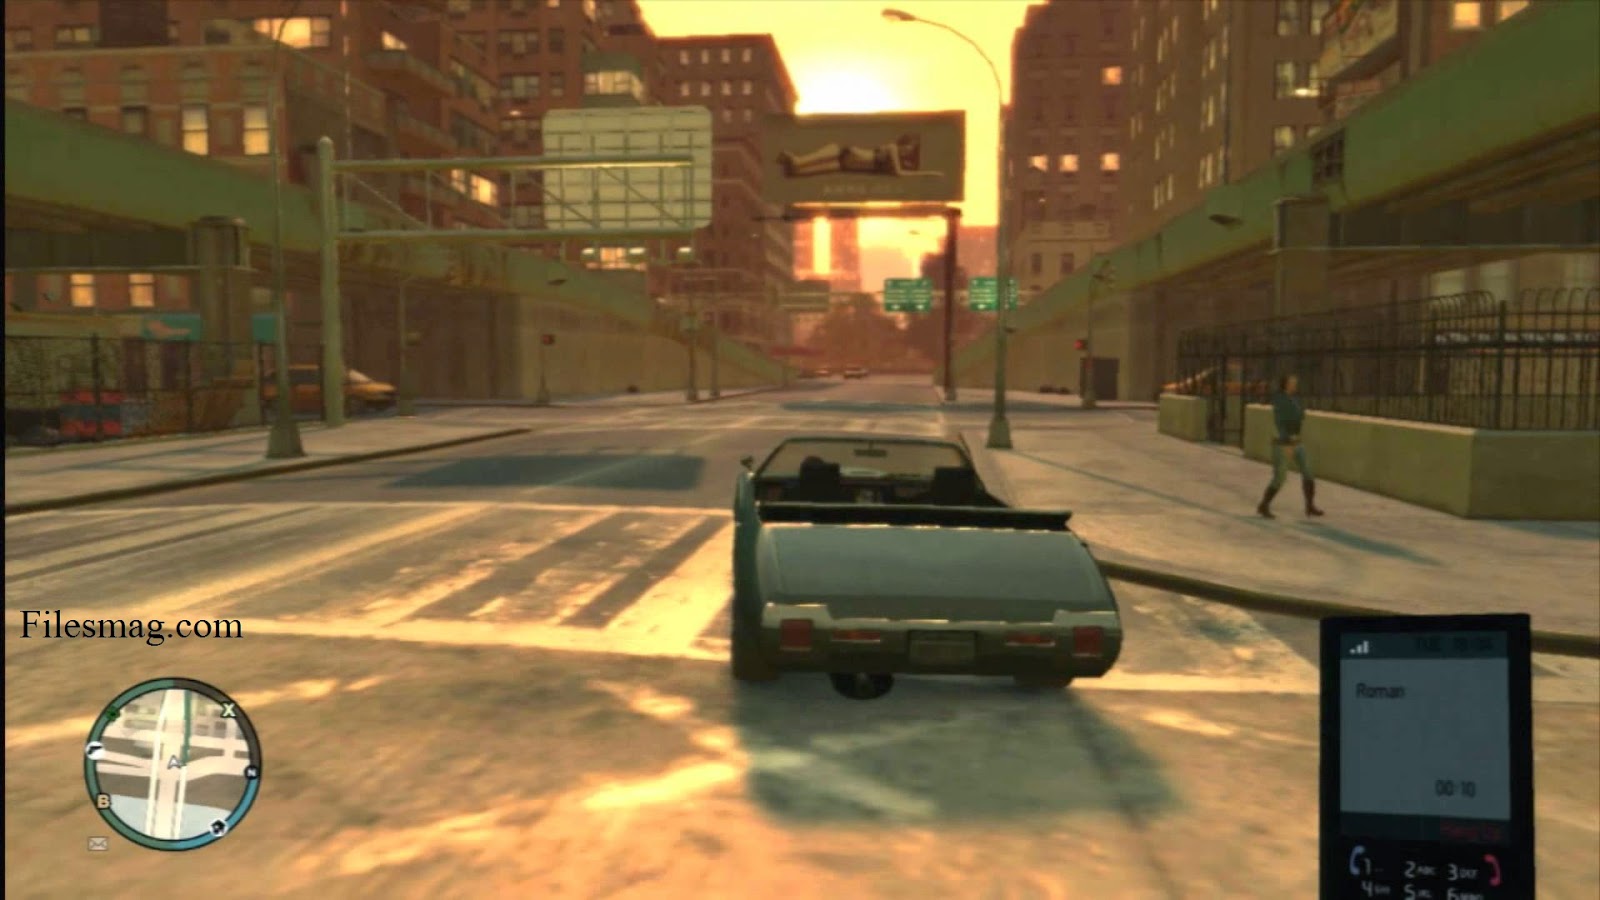 GTA 4 PC Game Free Download - PC Games, Software, Apps ...